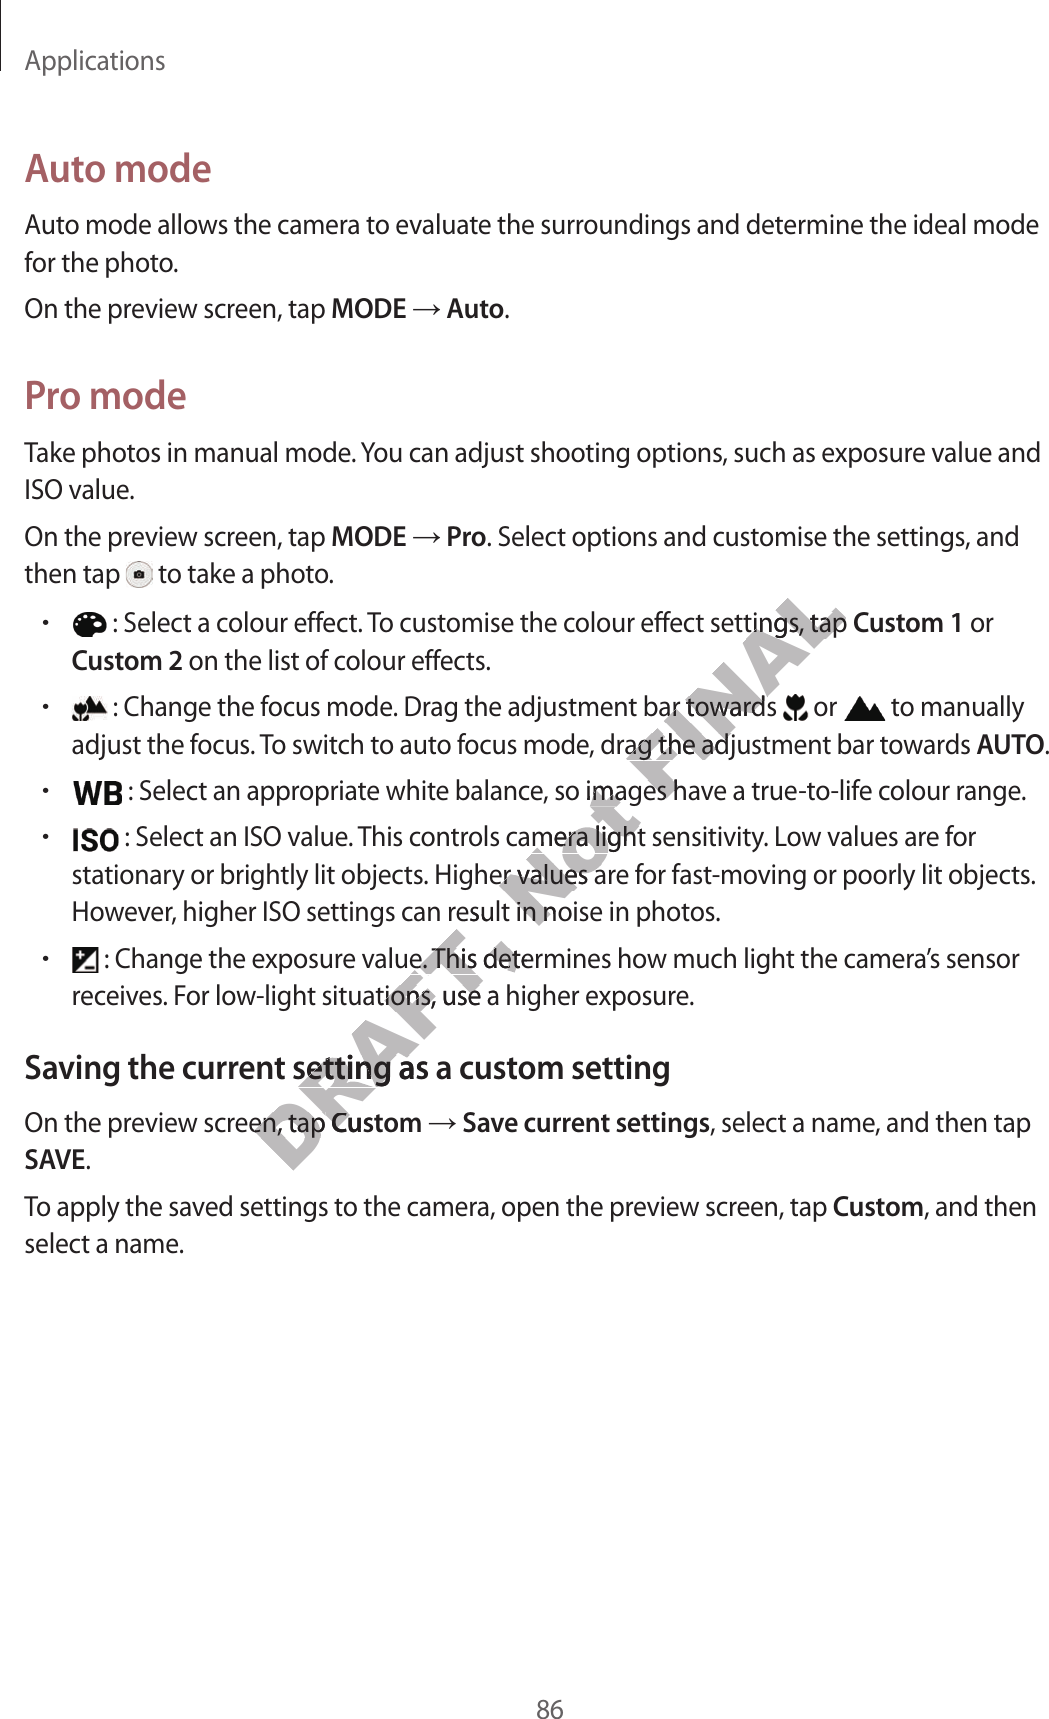 Applications86A uto modeAut o mode allow s the camera t o evalua te the surr oundings and det ermine the ideal mode for the phot o.On the preview scr een, tap MODE  Auto.Pr o modeTake photos in manual mode. You can adjust shooting options, such as exposure v alue and ISO value.On the preview scr een, tap MODE  Pro. Select options and customise the settings, and then tap   to take a photo .• : Select a colour eff ect. To customise the colour eff ect settings, tap Cust om 1 or Cust om 2 on the list of colour eff ects.• : Change the focus mode . Dr ag the adjustment bar t ow ar ds   or   to manually adjust the focus . To switch to auto focus mode , dr ag the adjustment bar t o war ds AUTO.• : Select an appropriate whit e balanc e , so images ha v e a true-to-life colour range .• : Select an ISO value. This controls camer a light sensitivity. Lo w values ar e f or stationary or brightly lit objects. Higher values are for fast -moving or poorly lit objects. Howev er, higher ISO settings can result in noise in photos .• : Change the exposure value.  T his det ermines how much light the camer a’s sensor receiv es . For low-ligh t situations , use a higher exposur e.Saving the curren t setting as a custom settingOn the preview scr een, tap Custom  Save curr en t settings, select a name, and then tap SAVE.To apply the sav ed settings to the camer a, open the pr eview scr een, tap Custom, and then select a name.DRAFT, Howev er, higher ISO settings can result in noise in photos .DRAFT, Howev er, higher ISO settings can result in noise in photos . : Change the exposure value.  T his det ermines how much light the camer a’s sensor DRAFT,  : Change the exposure value.  T his det ermines how much light the camer a’s sensor DRAFT, receiv es . For low-ligh t situations , use a higher exposur e.DRAFT, receiv es . For low-ligh t situations , use a higher exposur e.Saving the curren t setting as a custom settingDRAFT, Saving the curren t setting as a custom settingOn the preview scr een, tap DRAFT, On the preview scr een, tap CustomDRAFT, CustomNot  : Select an appropriate whit e balanc e , so images ha v e a true-to-life colour range .Not  : Select an appropriate whit e balanc e , so images ha v e a true-to-life colour range . : Select an ISO value. This controls camer a light sensitivity. Lo w values ar e f or Not  : Select an ISO value. This controls camer a light sensitivity. Lo w values ar e f or stationary or brightly lit objects. Higher values are for fast -moving or poorly lit objects. Not stationary or brightly lit objects. Higher values are for fast -moving or poorly lit objects. Howev er, higher ISO settings can result in noise in photos .Not Howev er, higher ISO settings can result in noise in photos .FINAL : Select a colour eff ect. To customise the colour eff ect settings, tap FINAL : Select a colour eff ect. To customise the colour eff ect settings, tap  : Change the focus mode . Dr ag the adjustment bar t ow ar ds FINAL : Change the focus mode . Dr ag the adjustment bar t ow ar ds adjust the focus . To switch to auto focus mode , dr ag the adjustment bar t o war ds FINALadjust the focus . To switch to auto focus mode , dr ag the adjustment bar t o war ds  : Select an appropriate whit e balanc e , so images ha v e a true-to-life colour range .FINAL : Select an appropriate whit e balanc e , so images ha v e a true-to-life colour range .